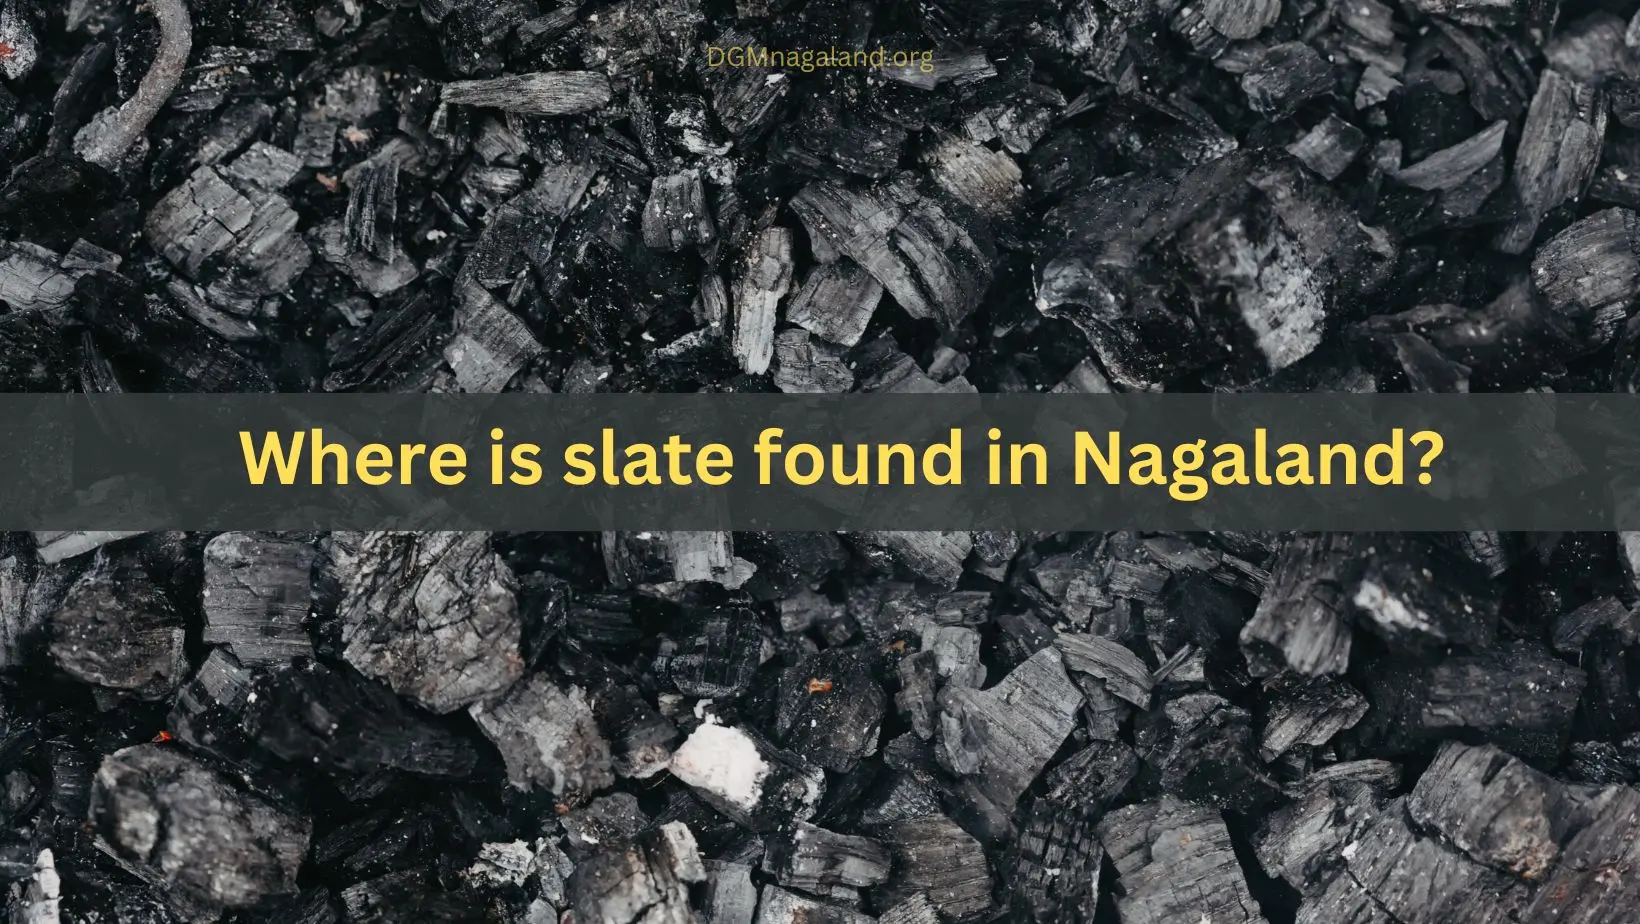 Where is slate found in Nagaland?